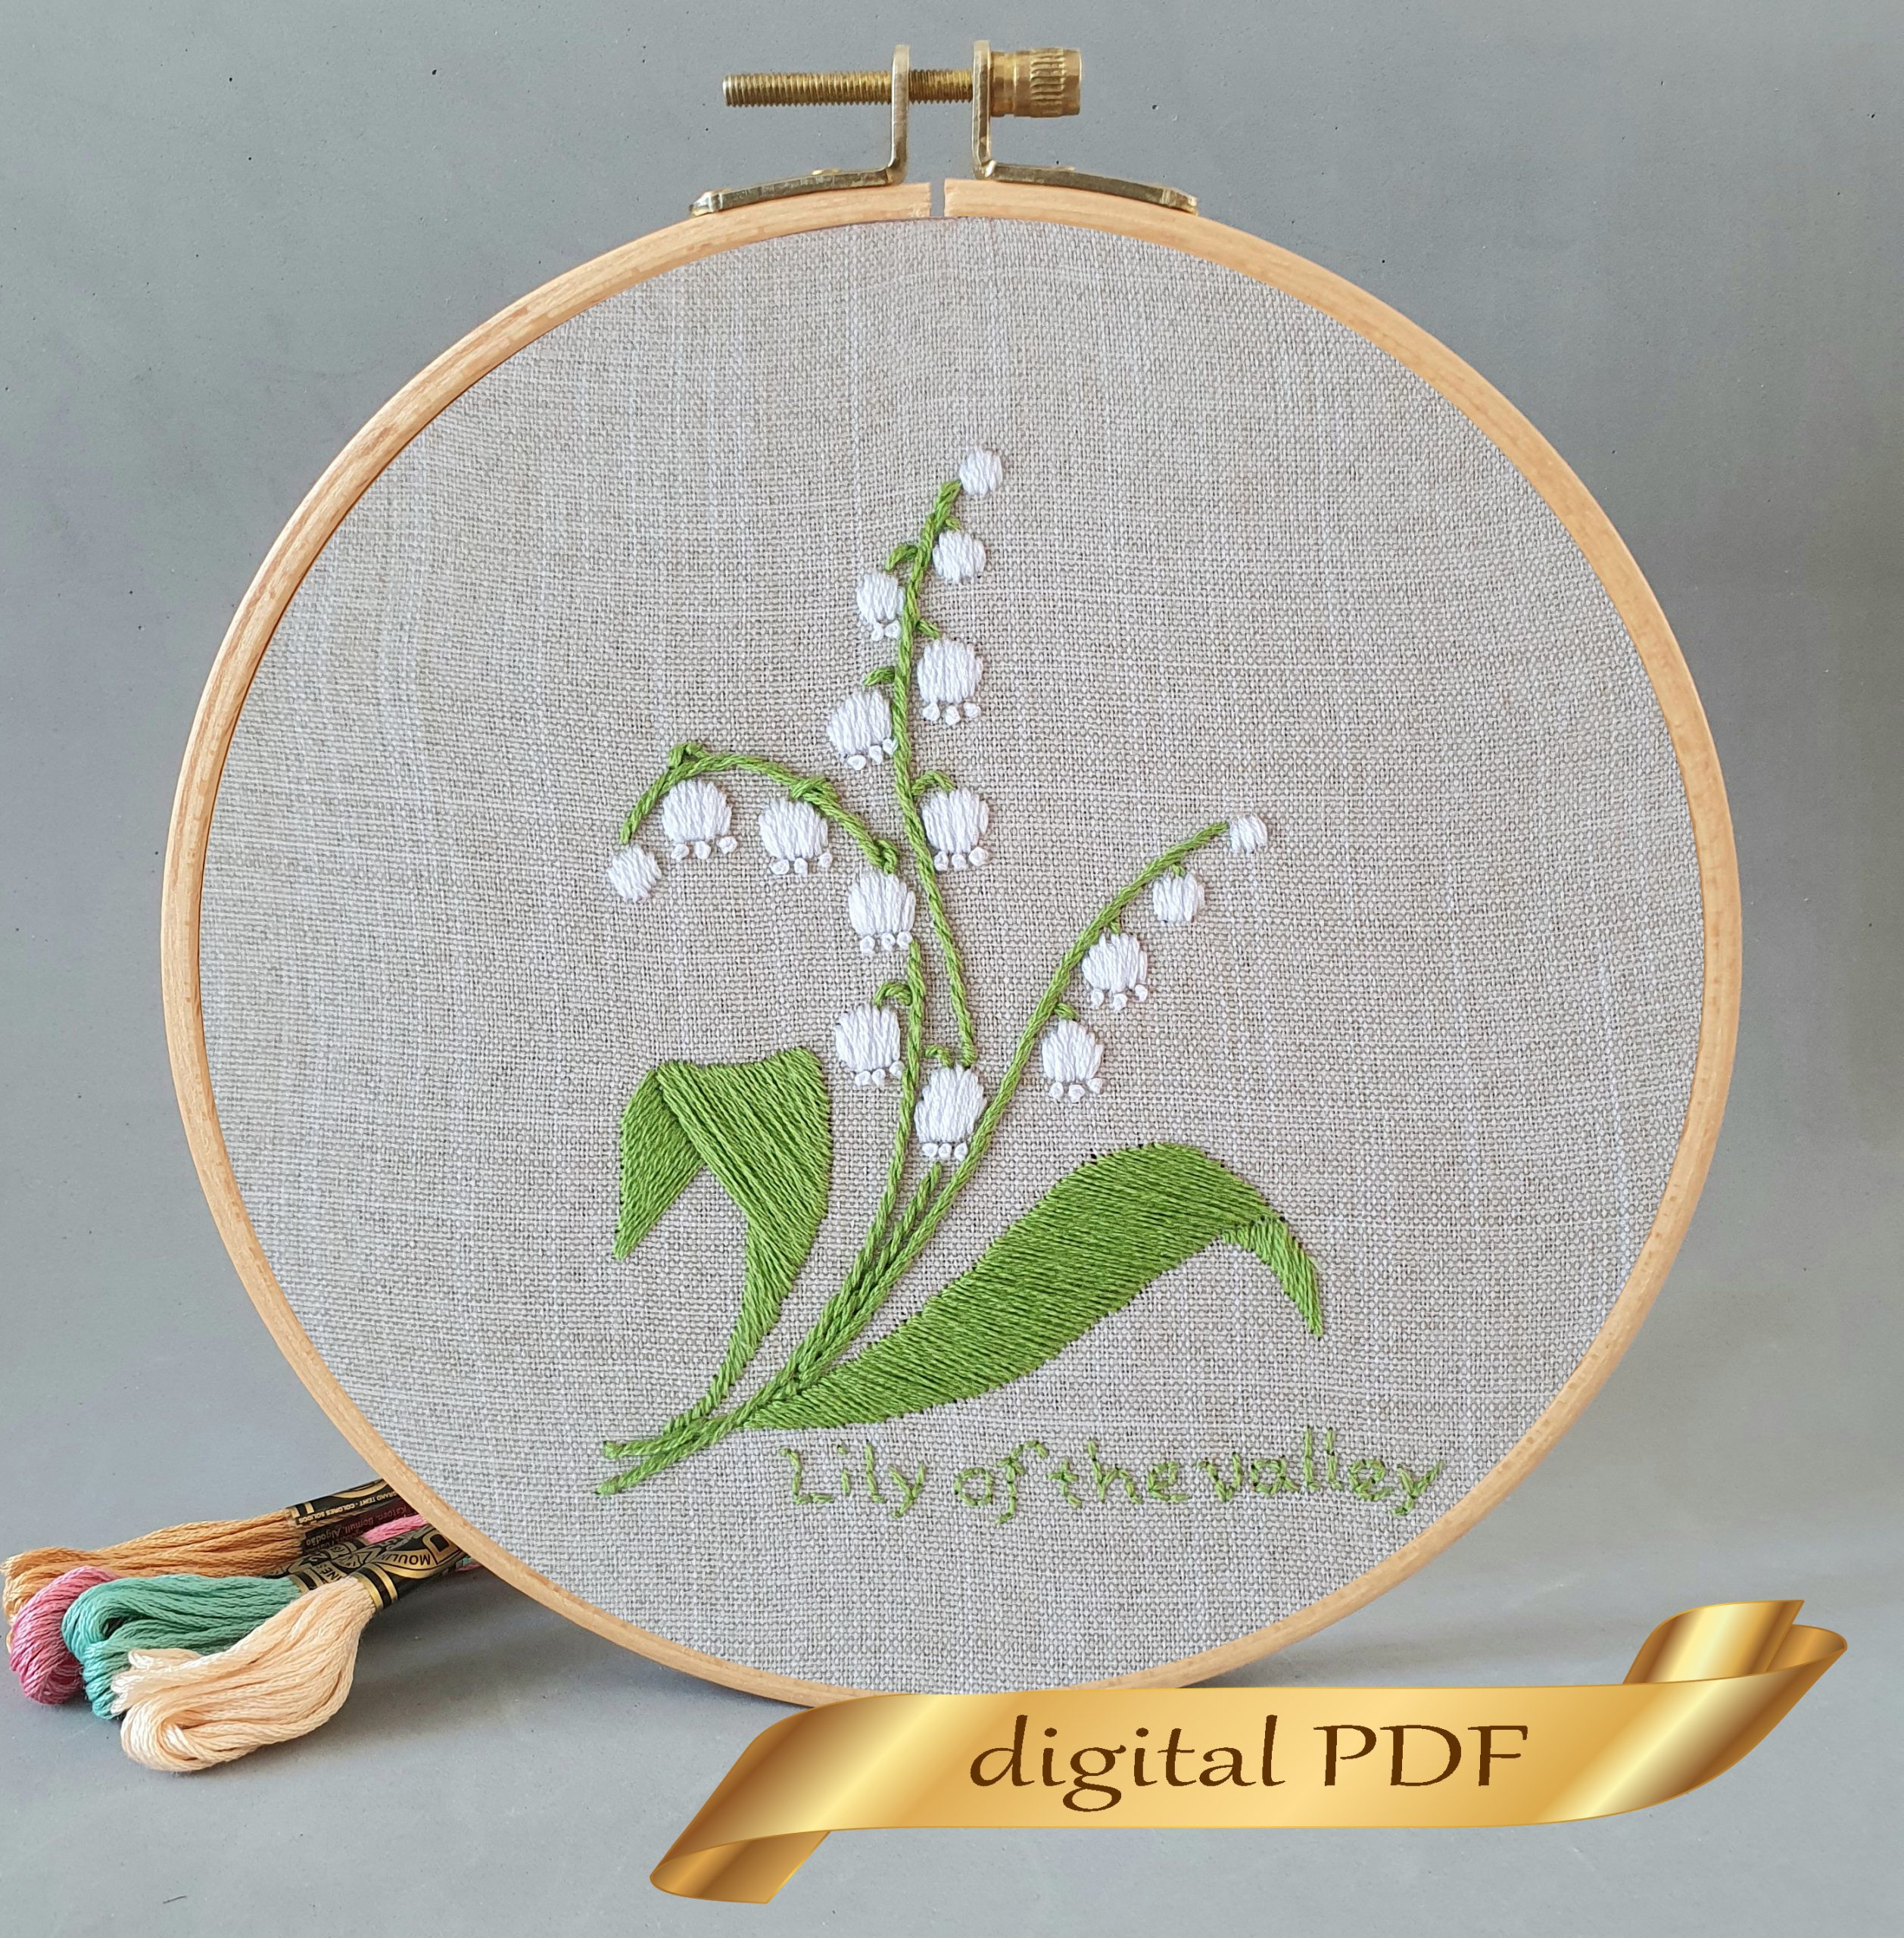 Lily of the valley pattern PDF hand embroidery - Crealandia